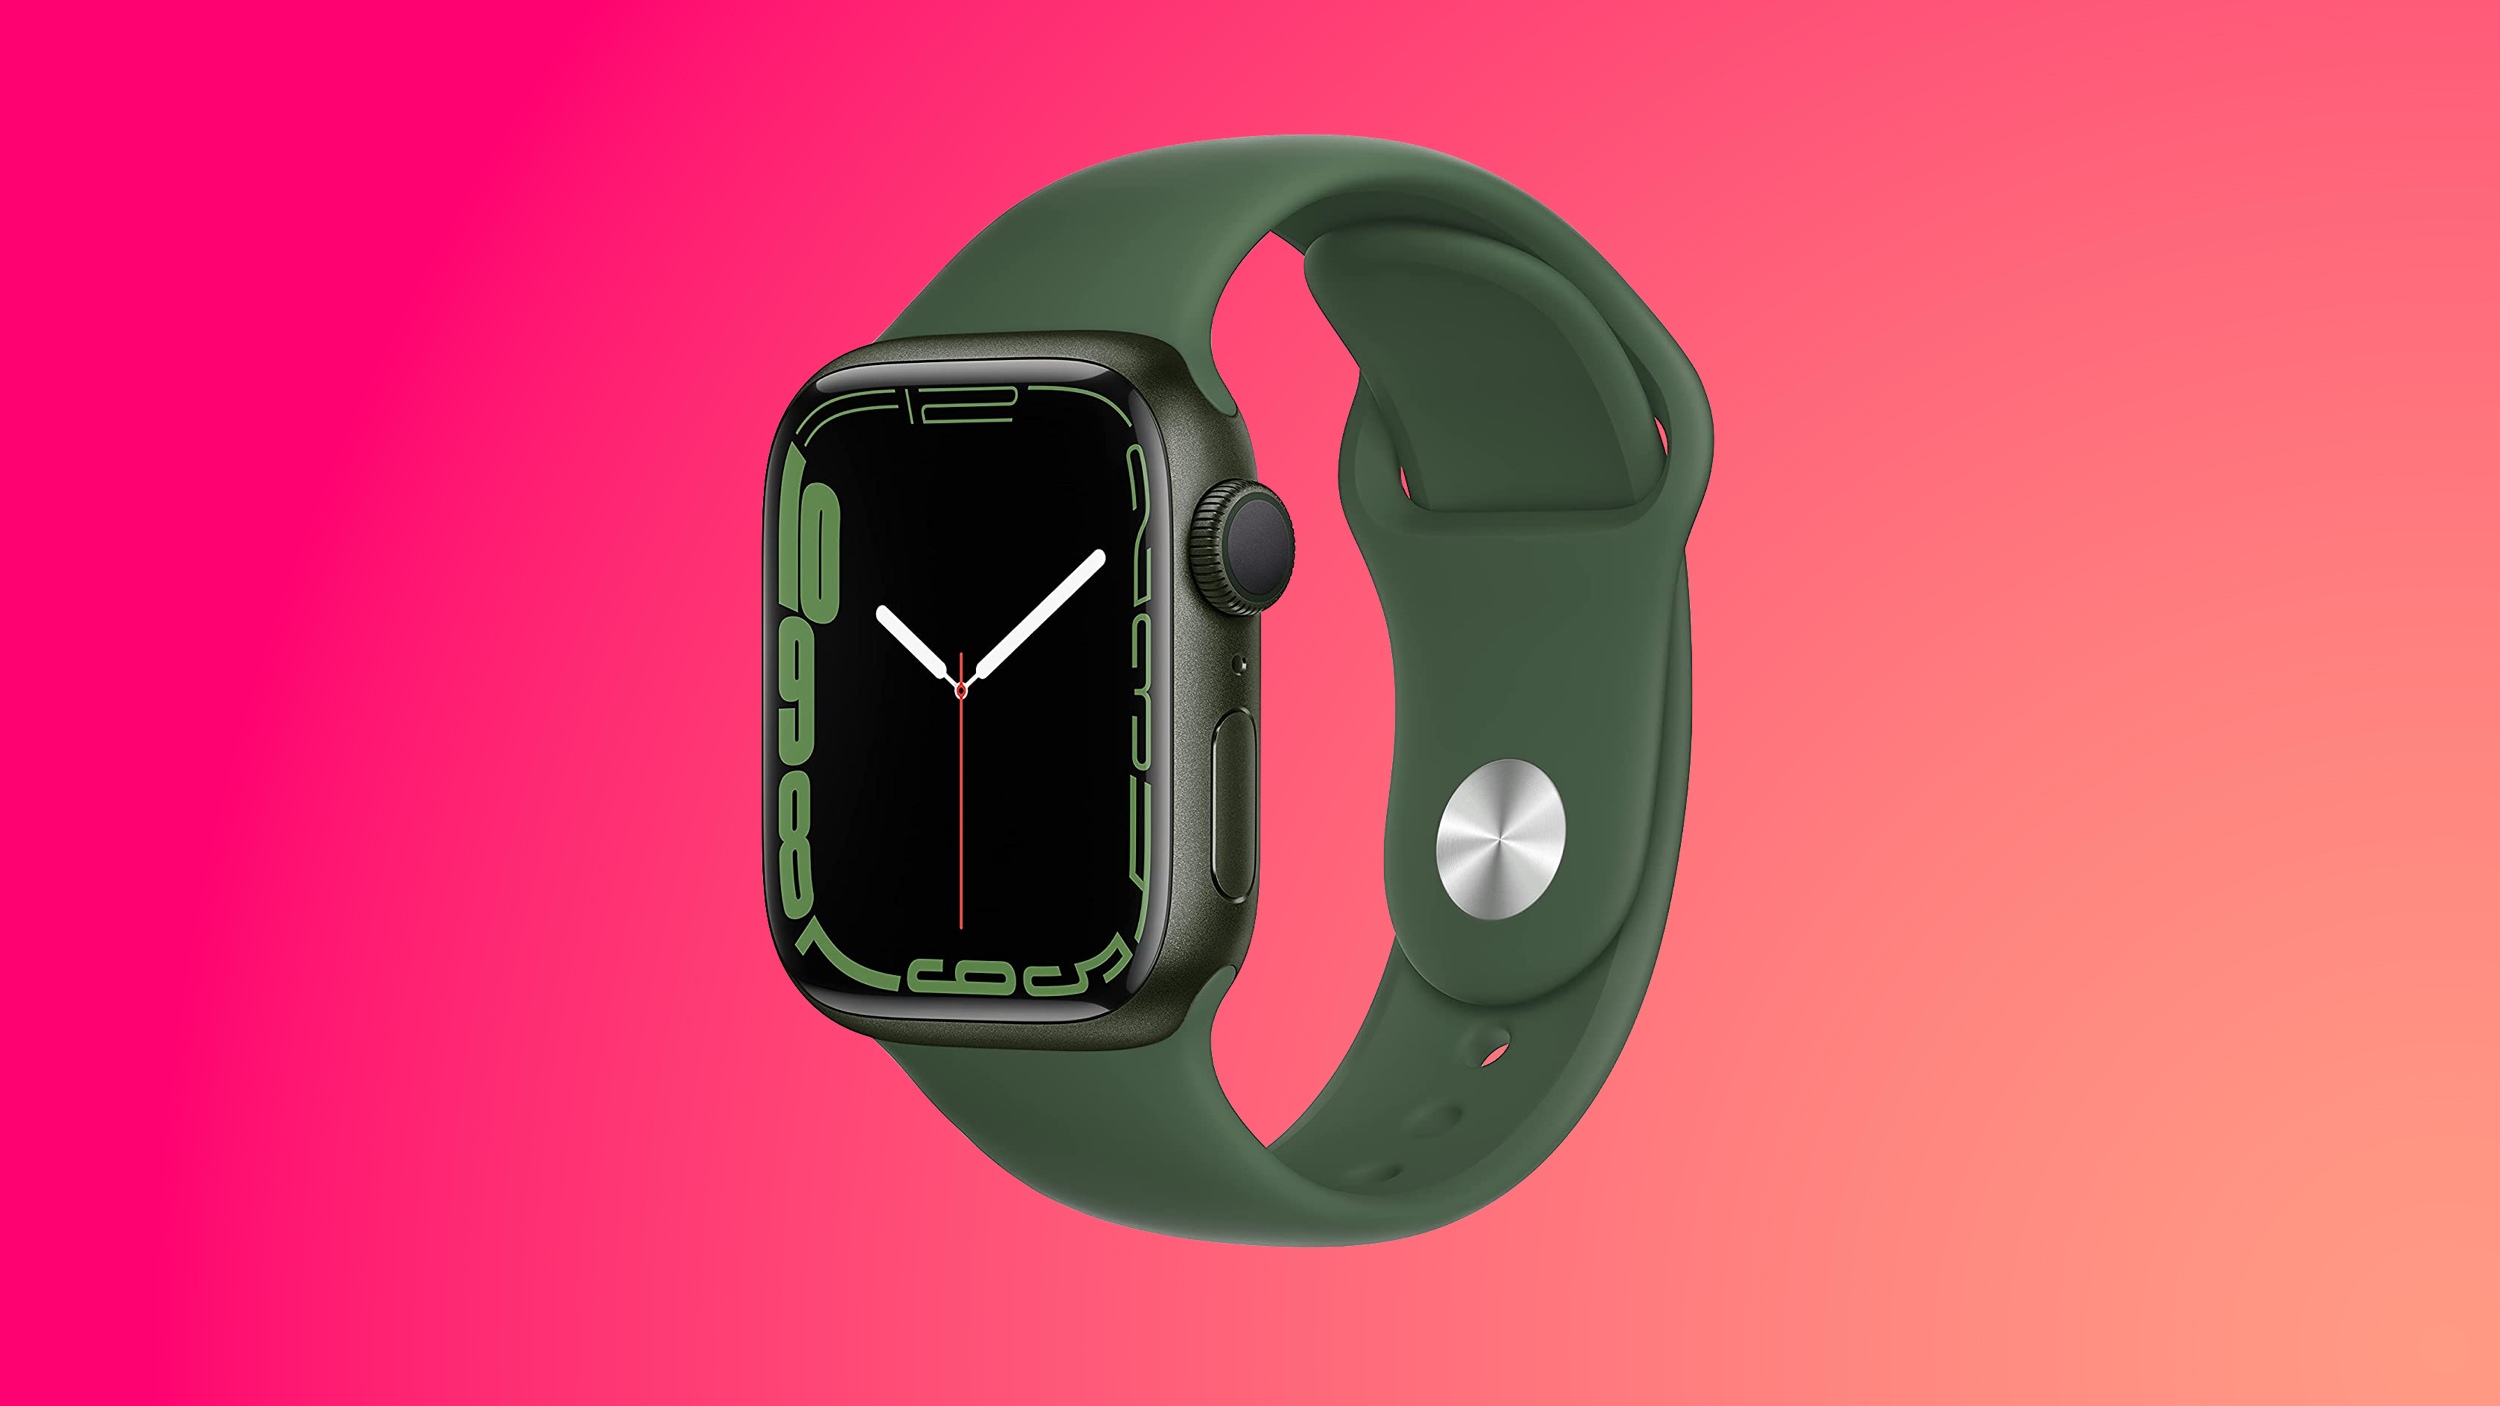 Apple Watch Pro: What to Expect for Apple’s High-End ‘Rugged’ Watch